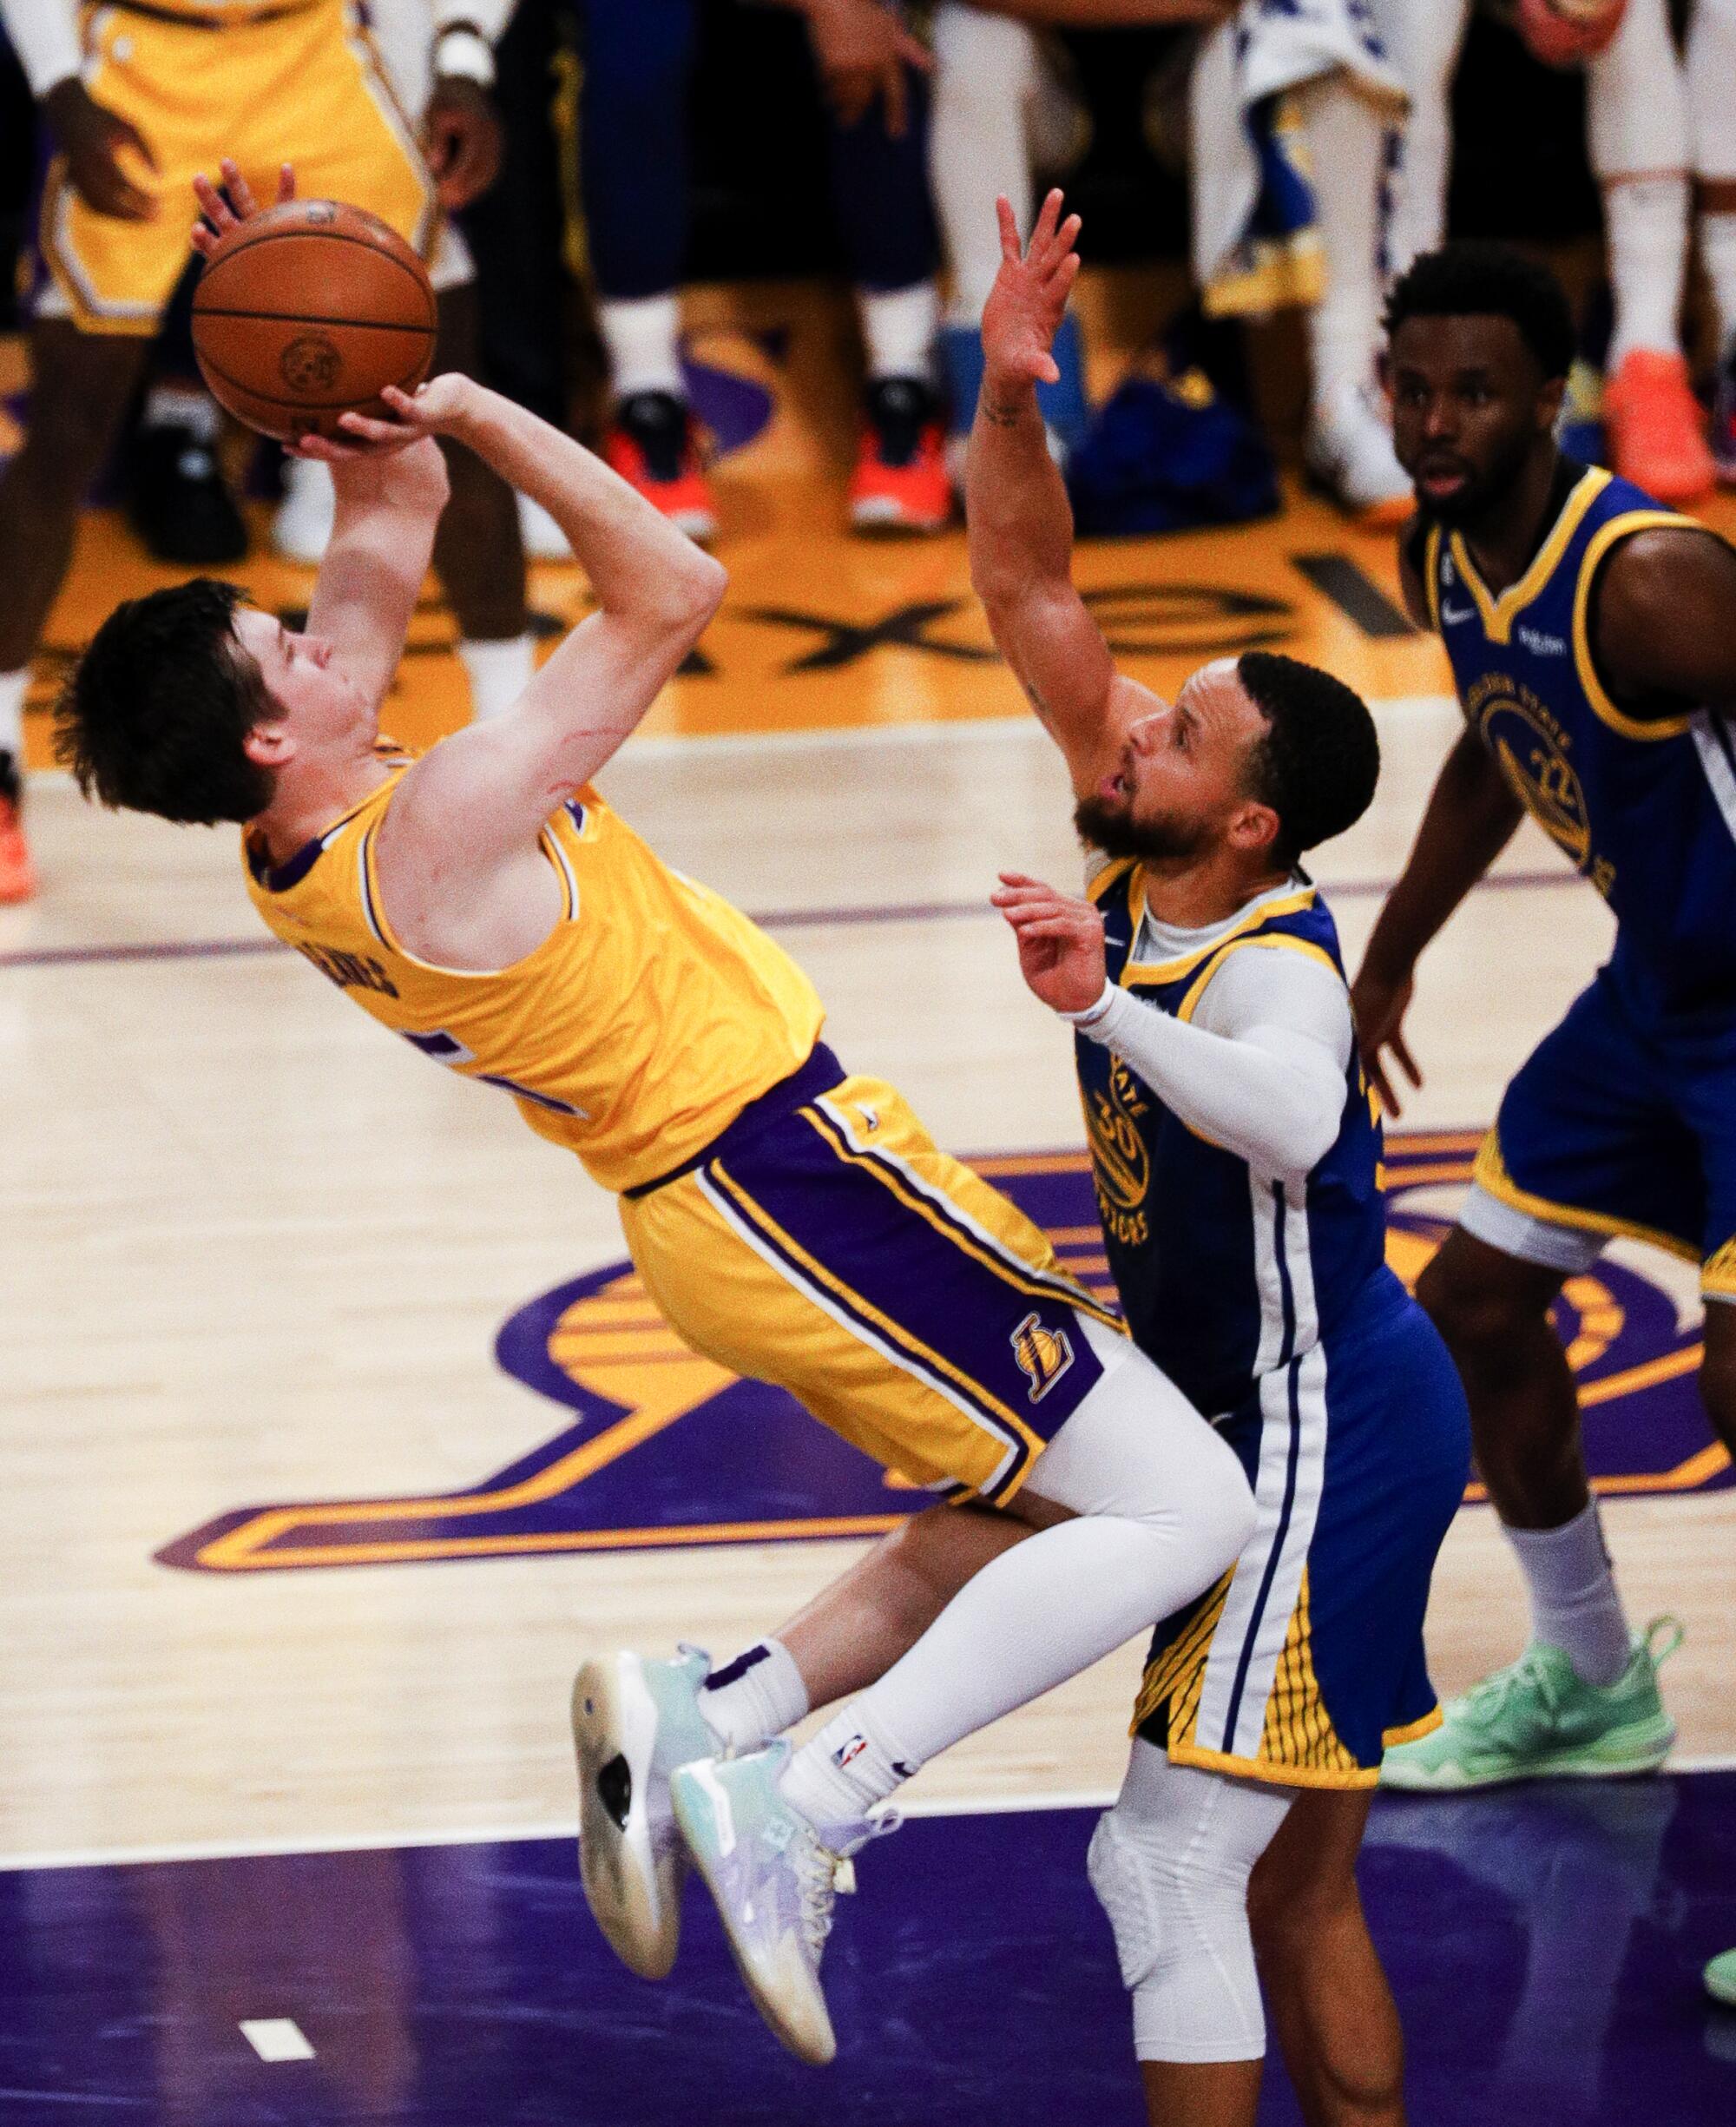 Lakers guard Austin Reaves, left, shoots after being fouled by Warriors guard Stephen Curry during the first half.